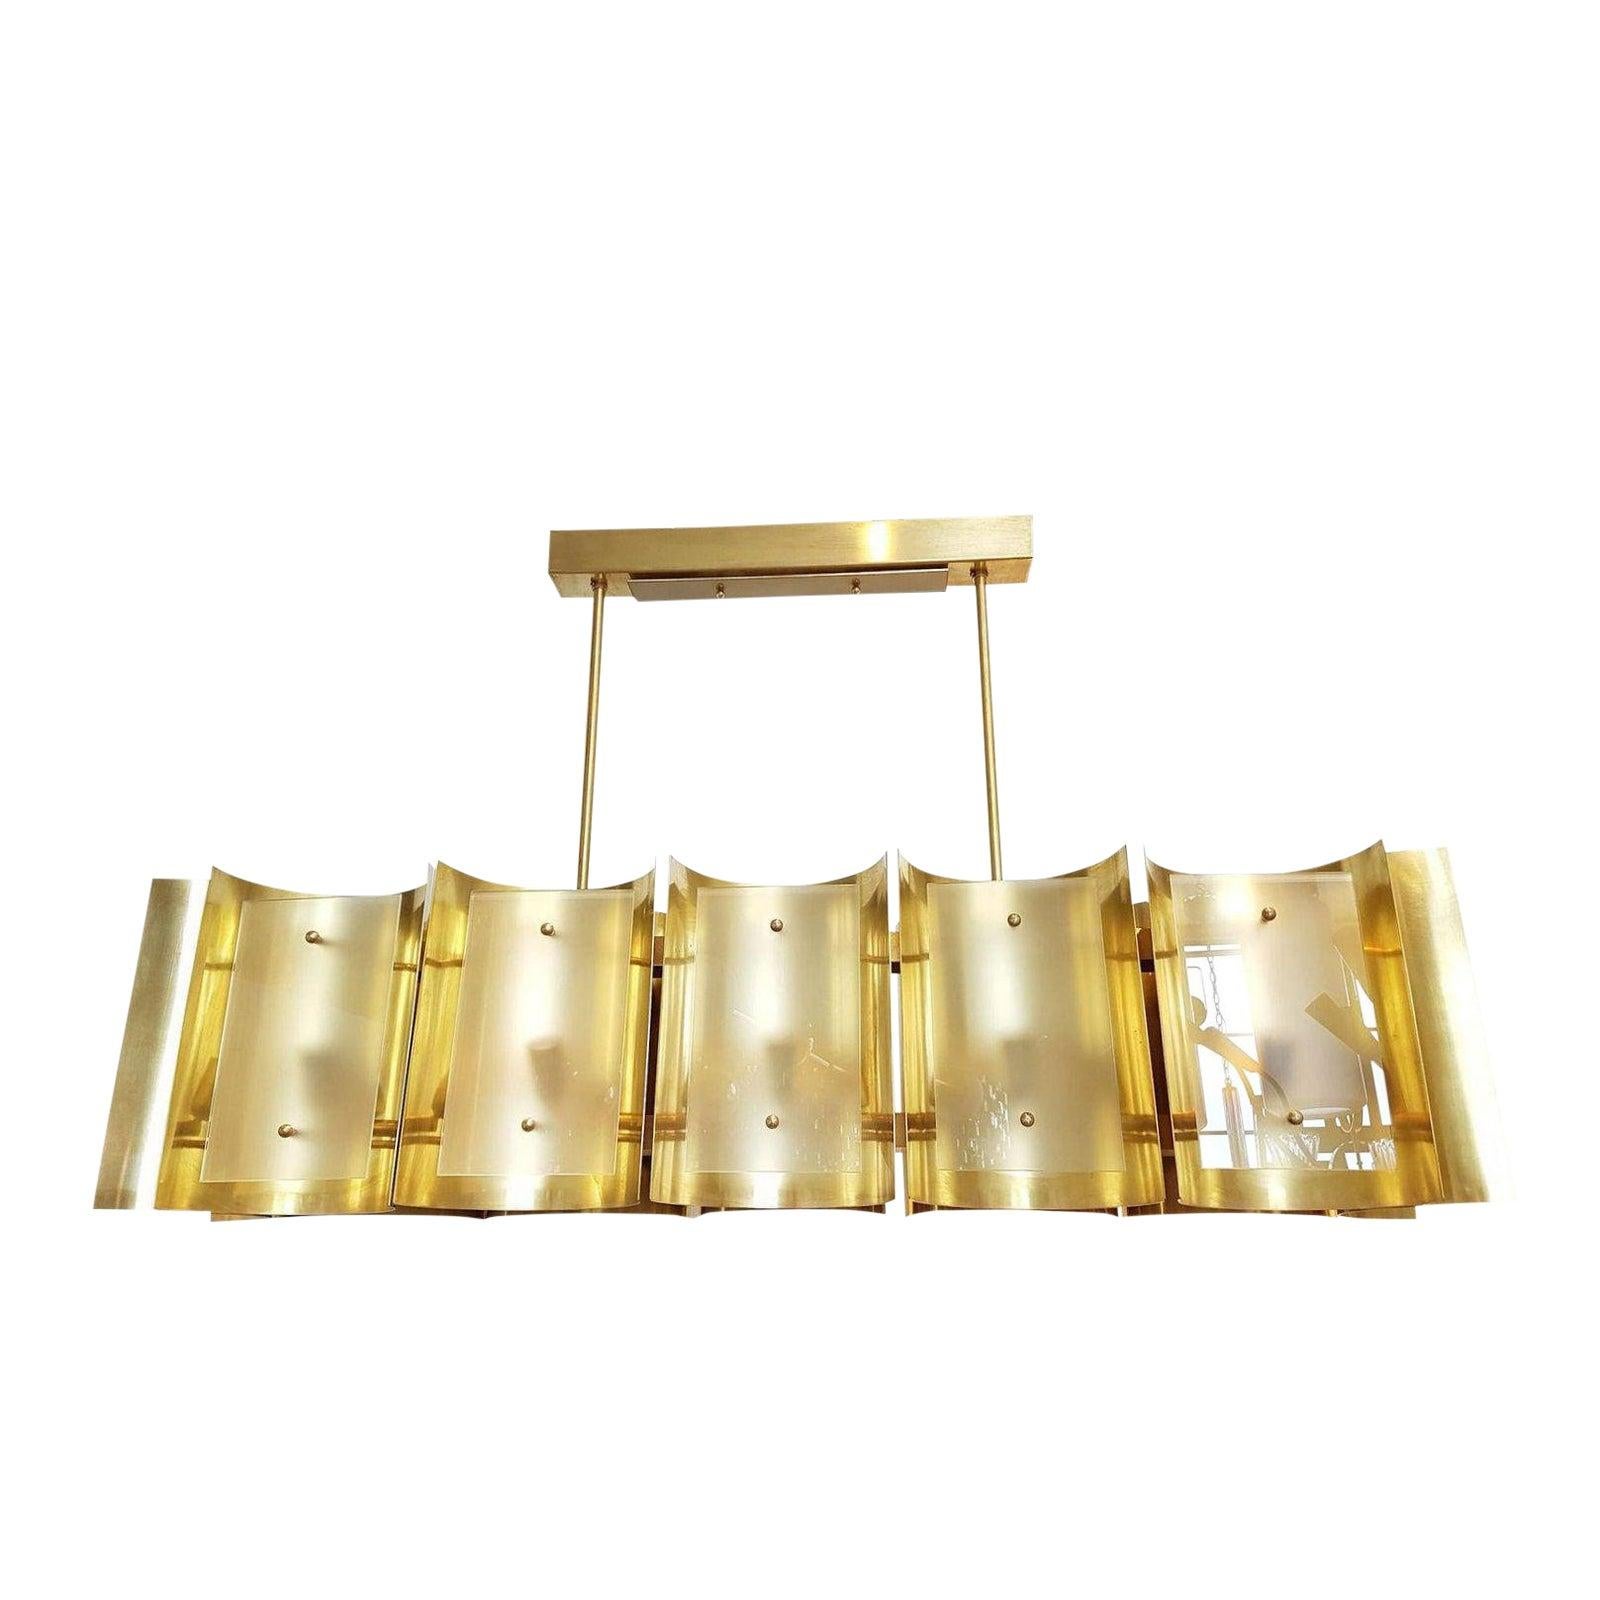 Mid-Century modern style large rectangular shaped brass & frosted glass chandelier; custom made - D'Lightus, Italy.
Limited editions.
Available now: a  12 brass sheets of metal, curved, nesting the light and covered up by a frosted glass